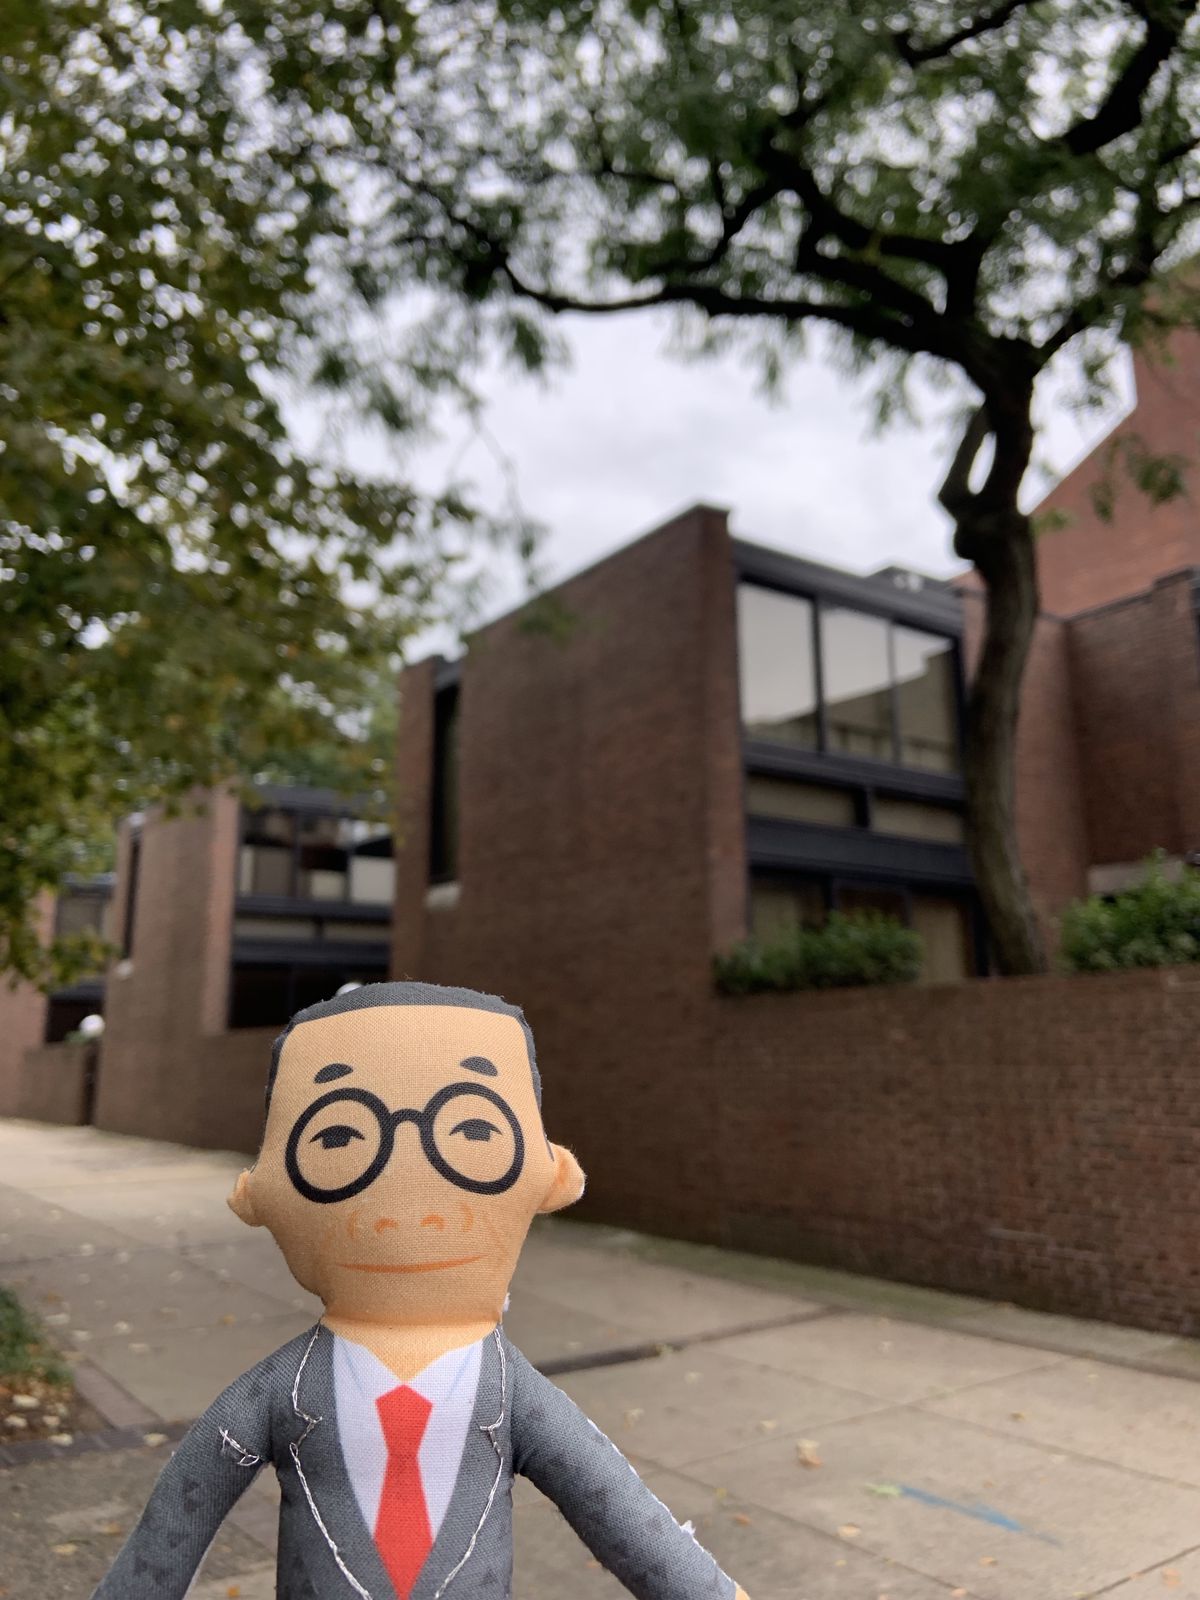 A small doll showing a bespectacled man in front of a brick and glass building.